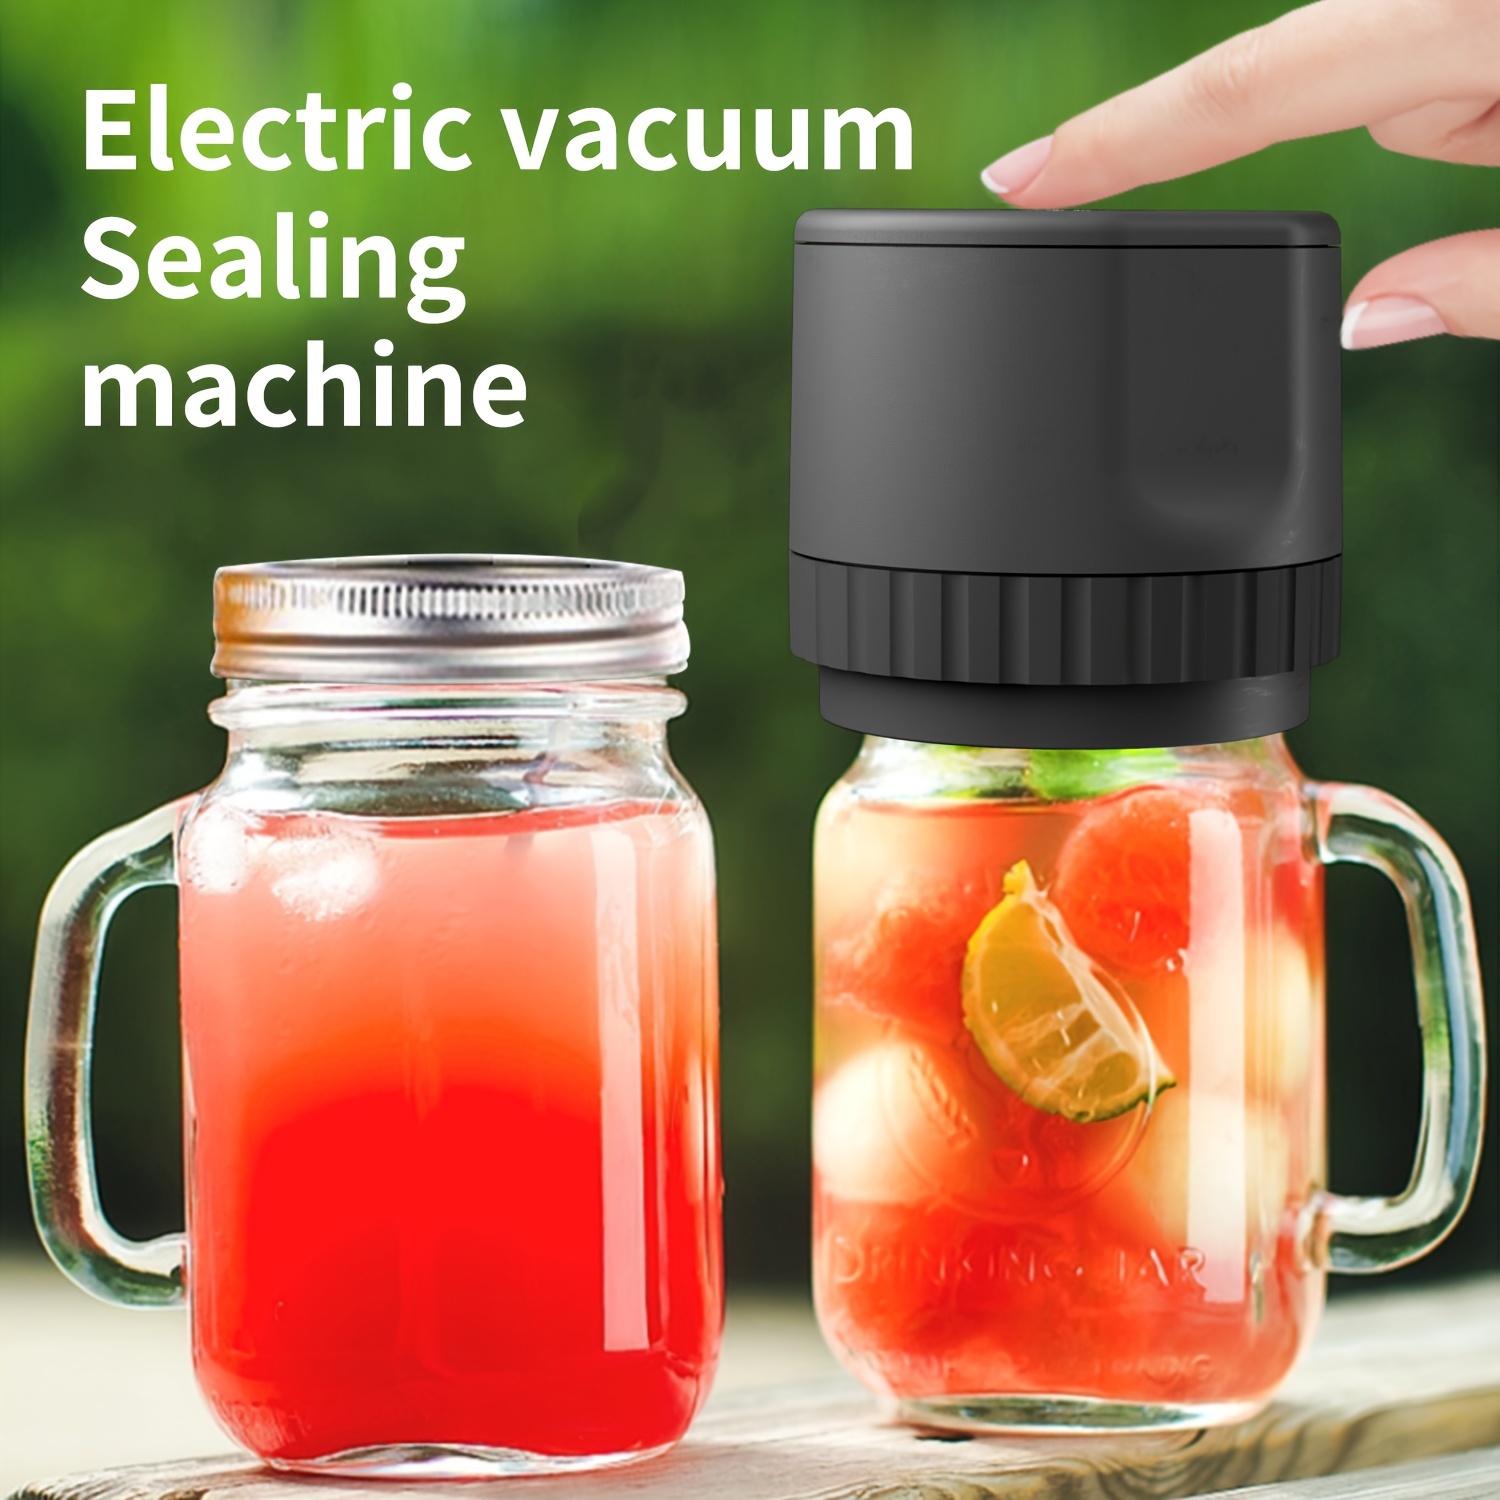 My Favorite Portable Vacuum Sealer for Jars and How To Use It